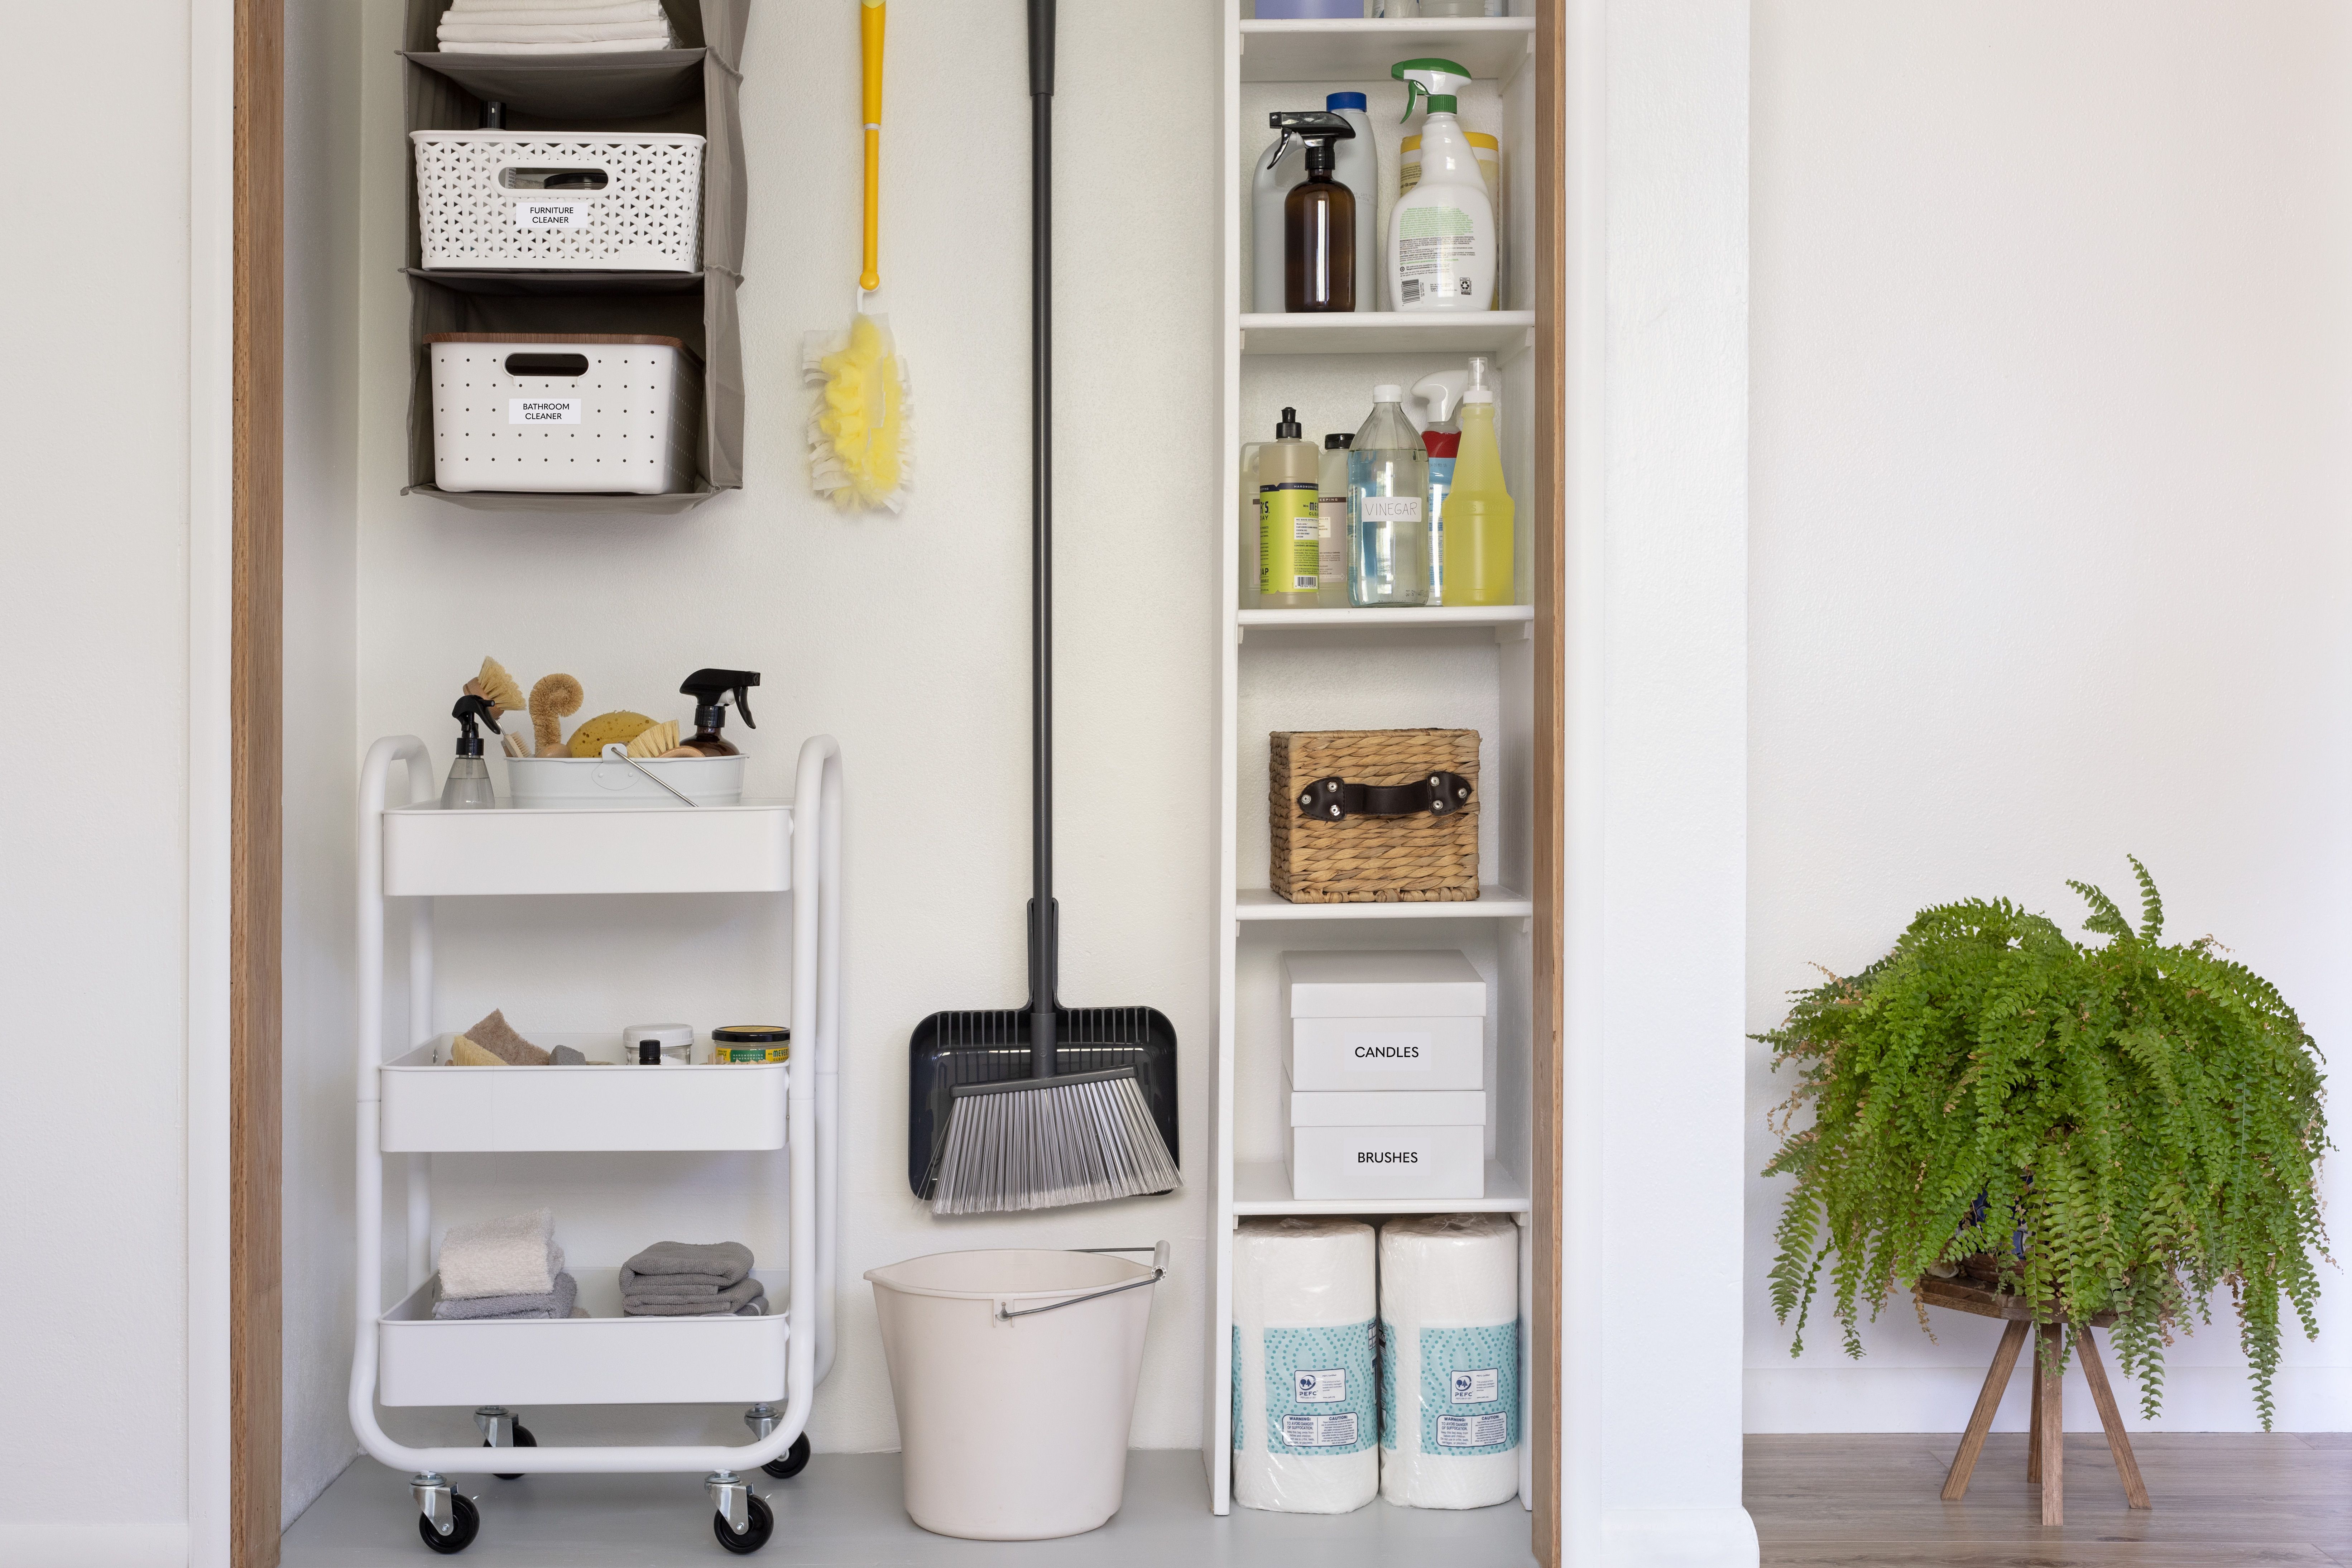 6 Smarter (and Safer) Ways to Store Cleaning Supplies